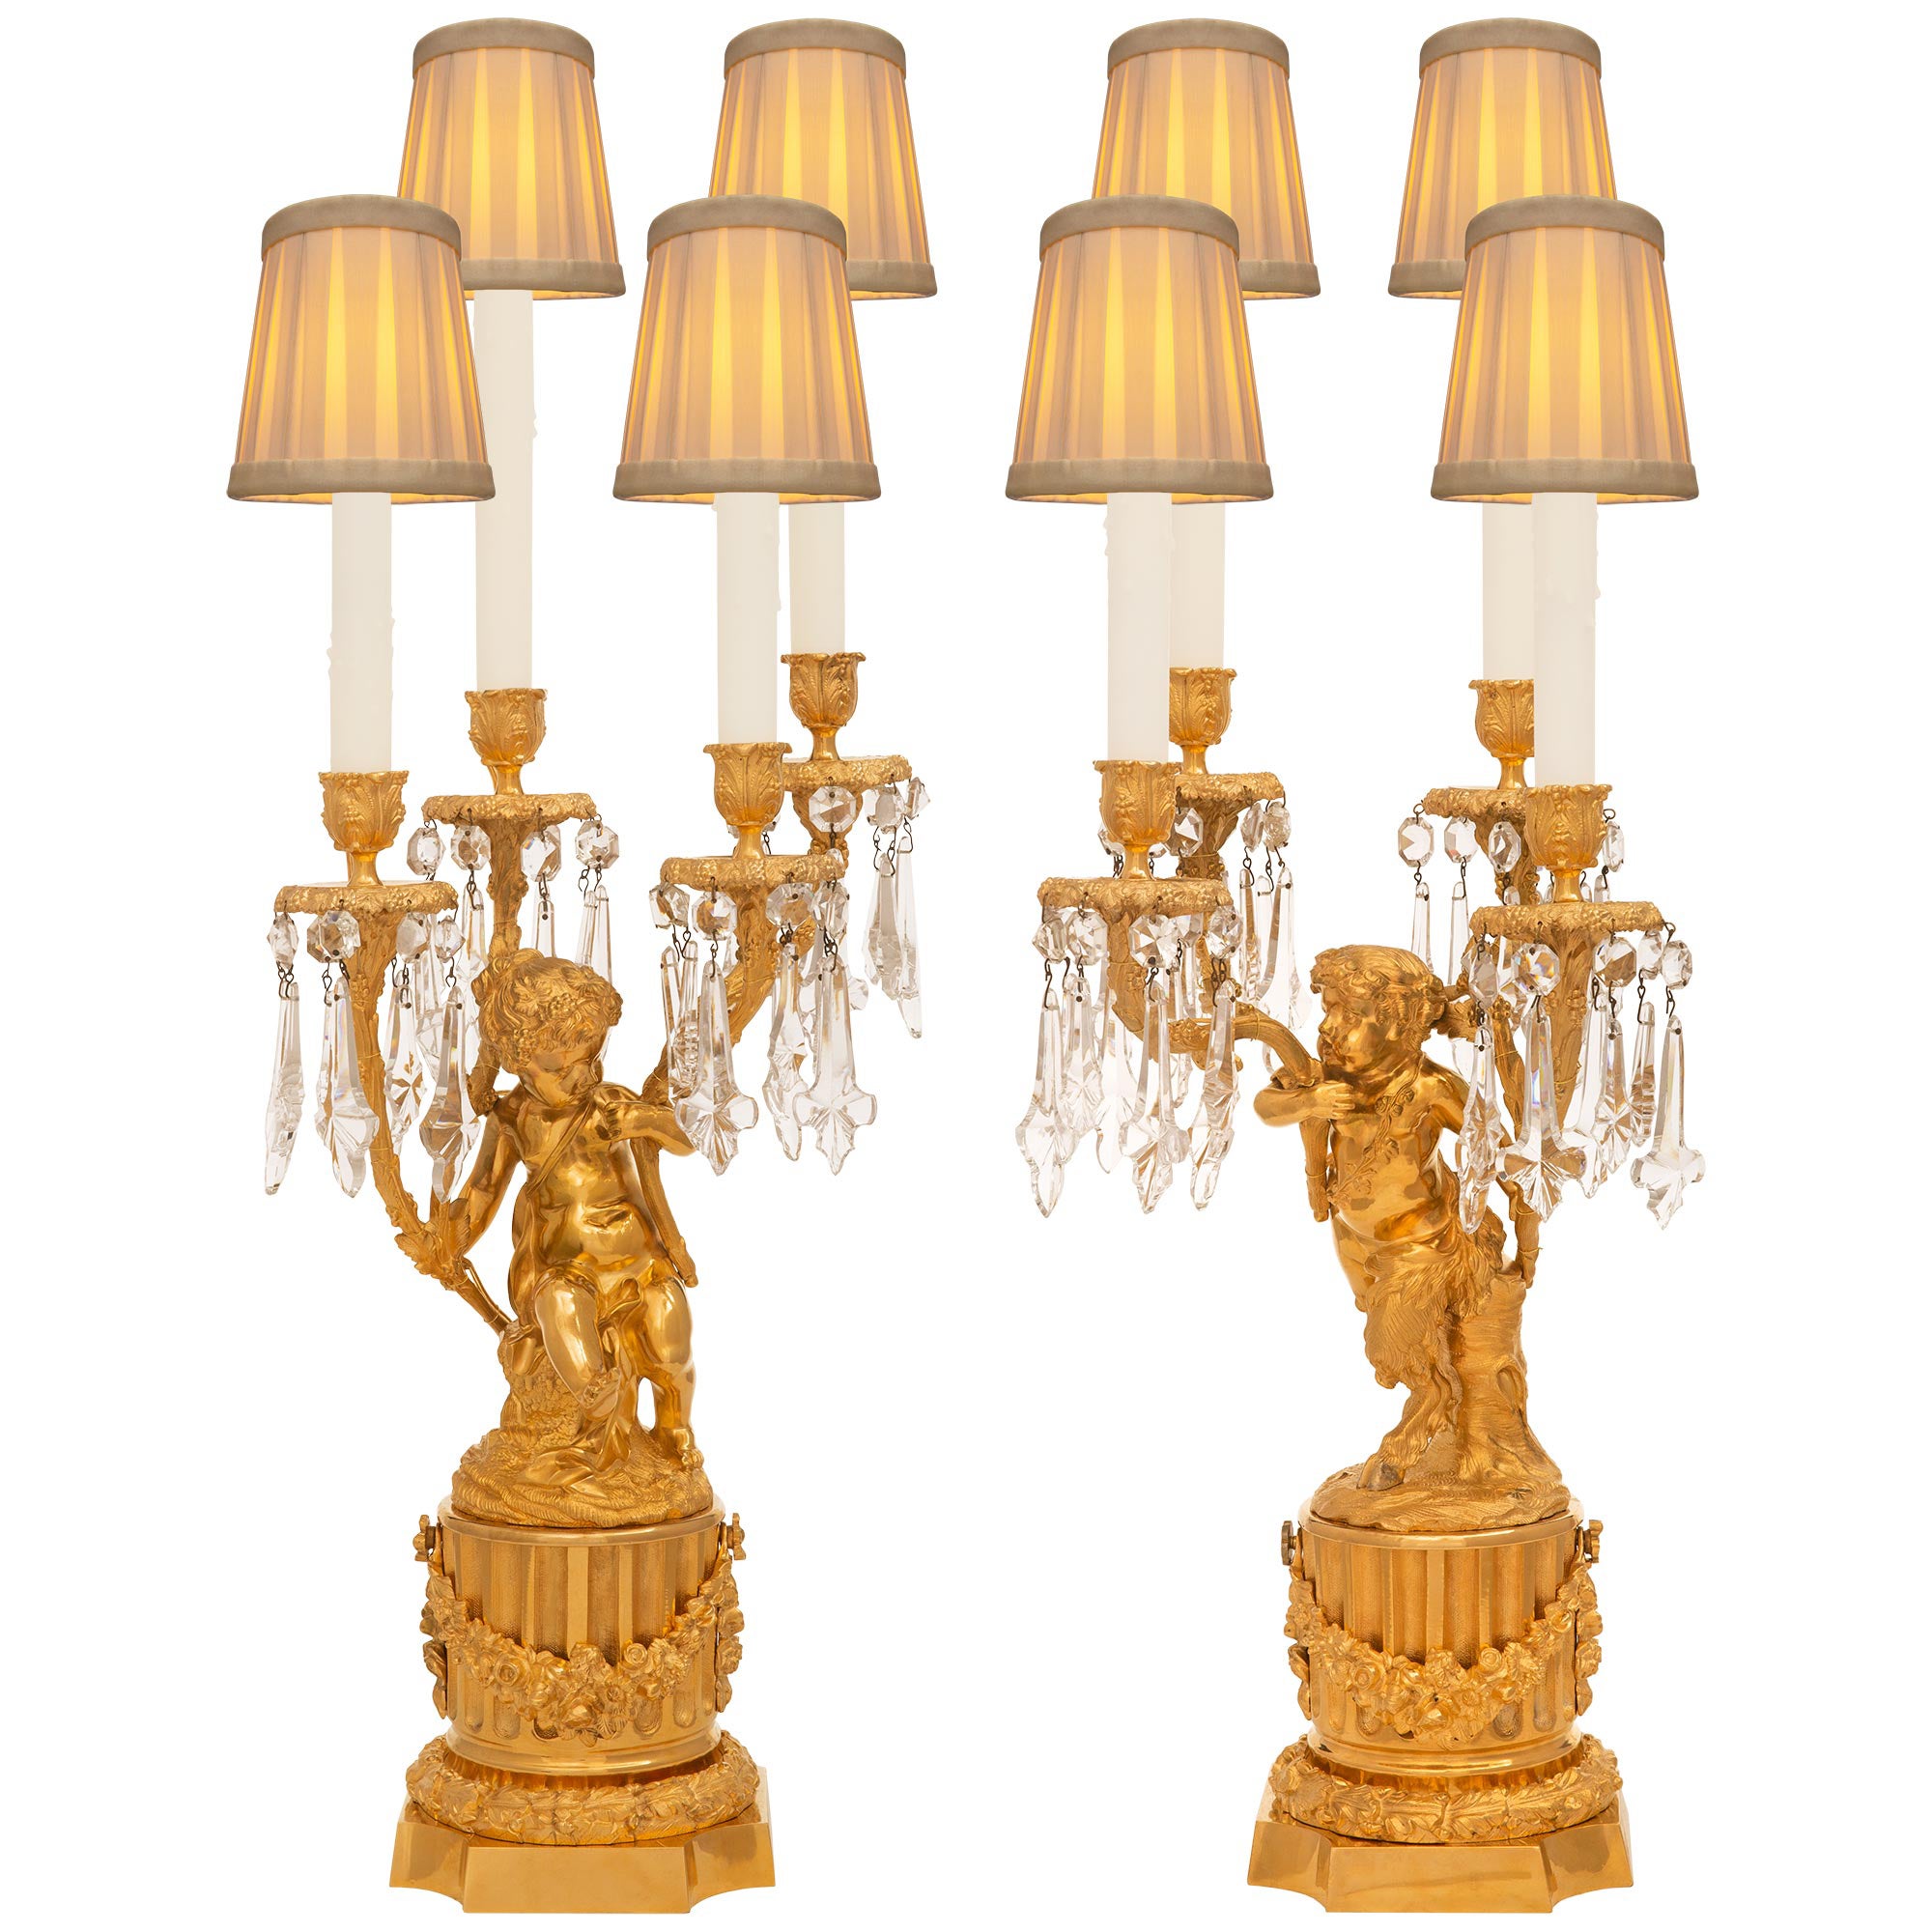 Trueing Pair of French 19th Century Louis XVI St. Ormolu & Crystal Candelabra Lamps